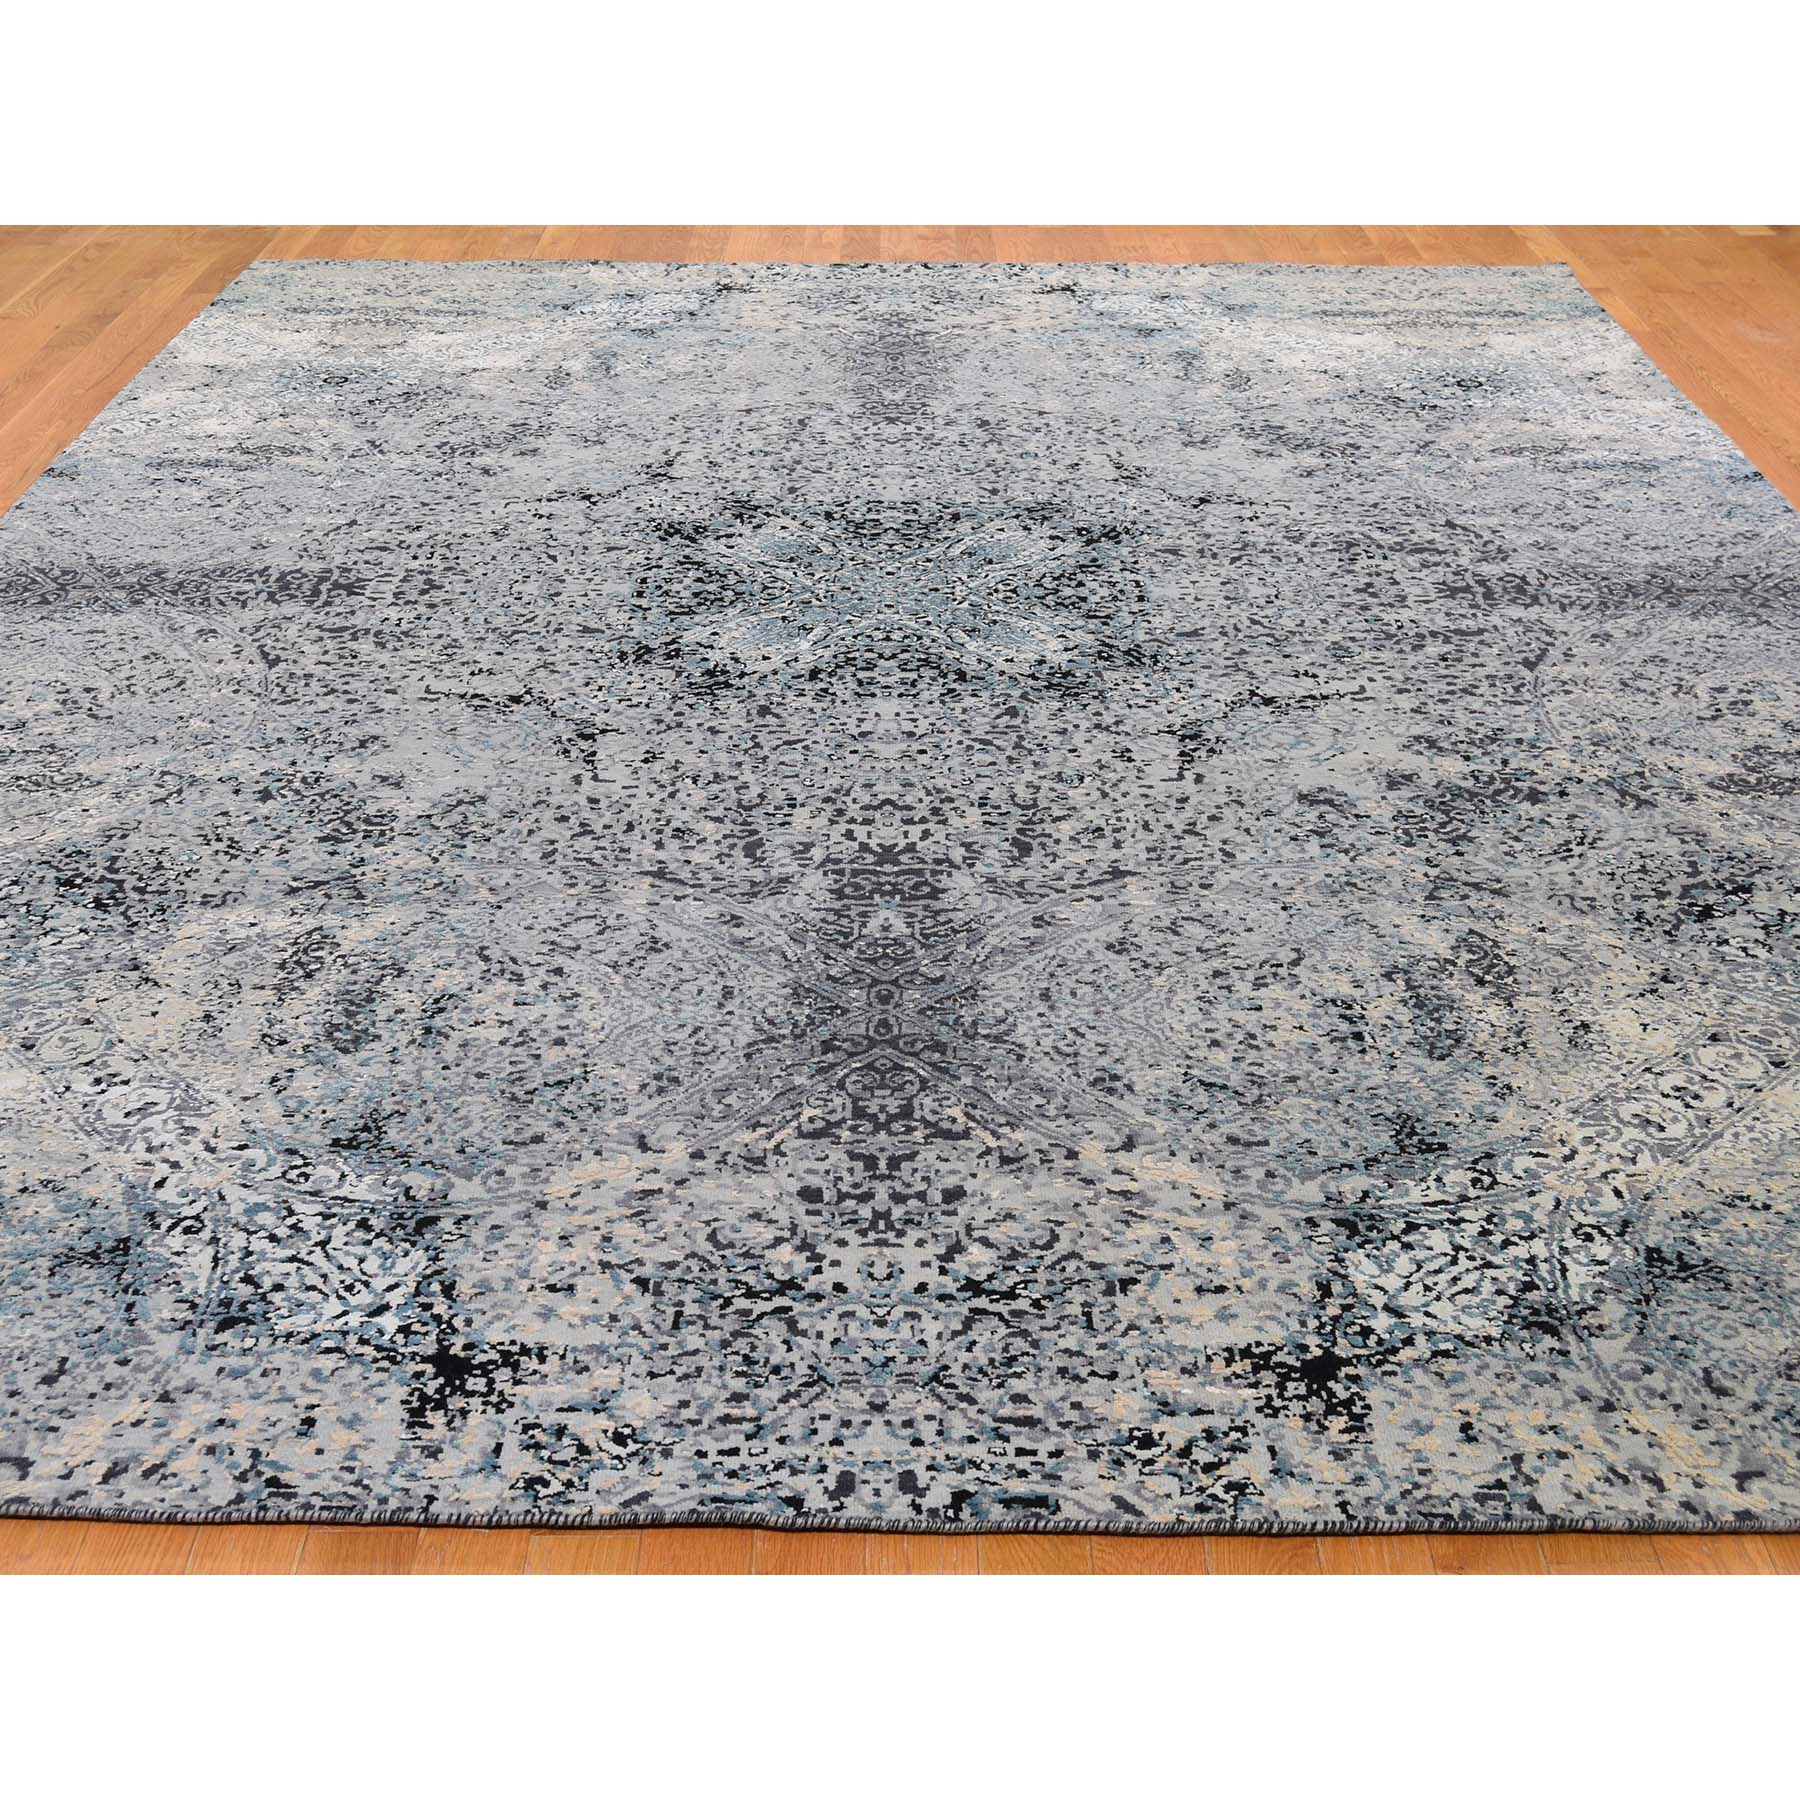 9-1 x12-2  Gray Wool And Silk Abstract Design Hand-Knotted Oriental Rug 